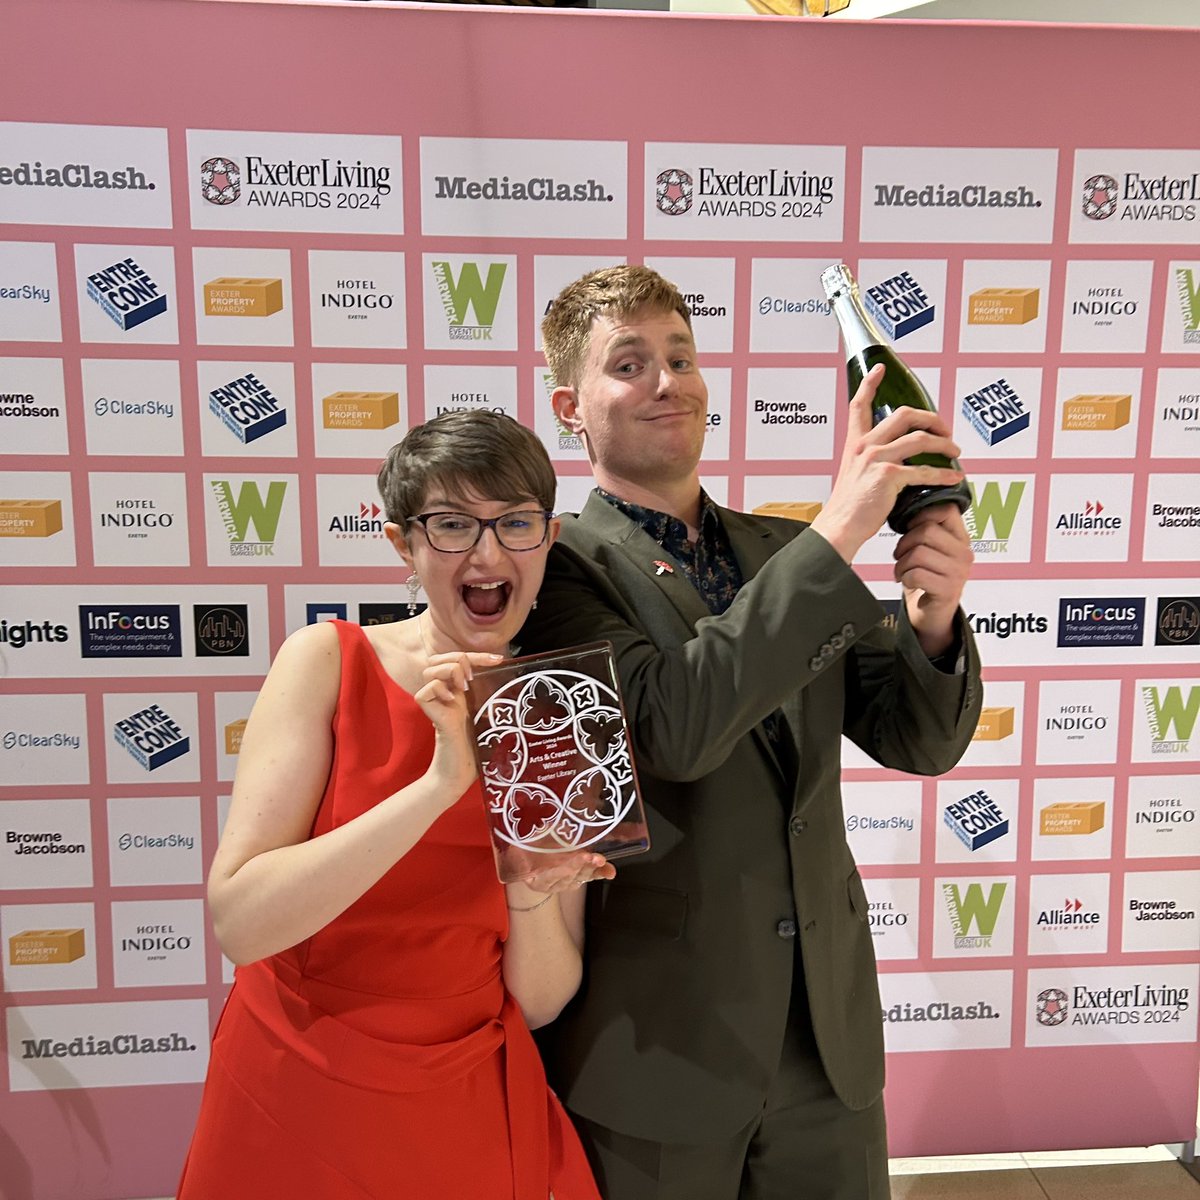 ✨ Arts & Creative Winner: @ExeterLibrary

“Inventive, vital role deep in heart of city’s cultural fabric, with impressive half a million visitors in 2023, many engaging events plus fostering of local talent.”